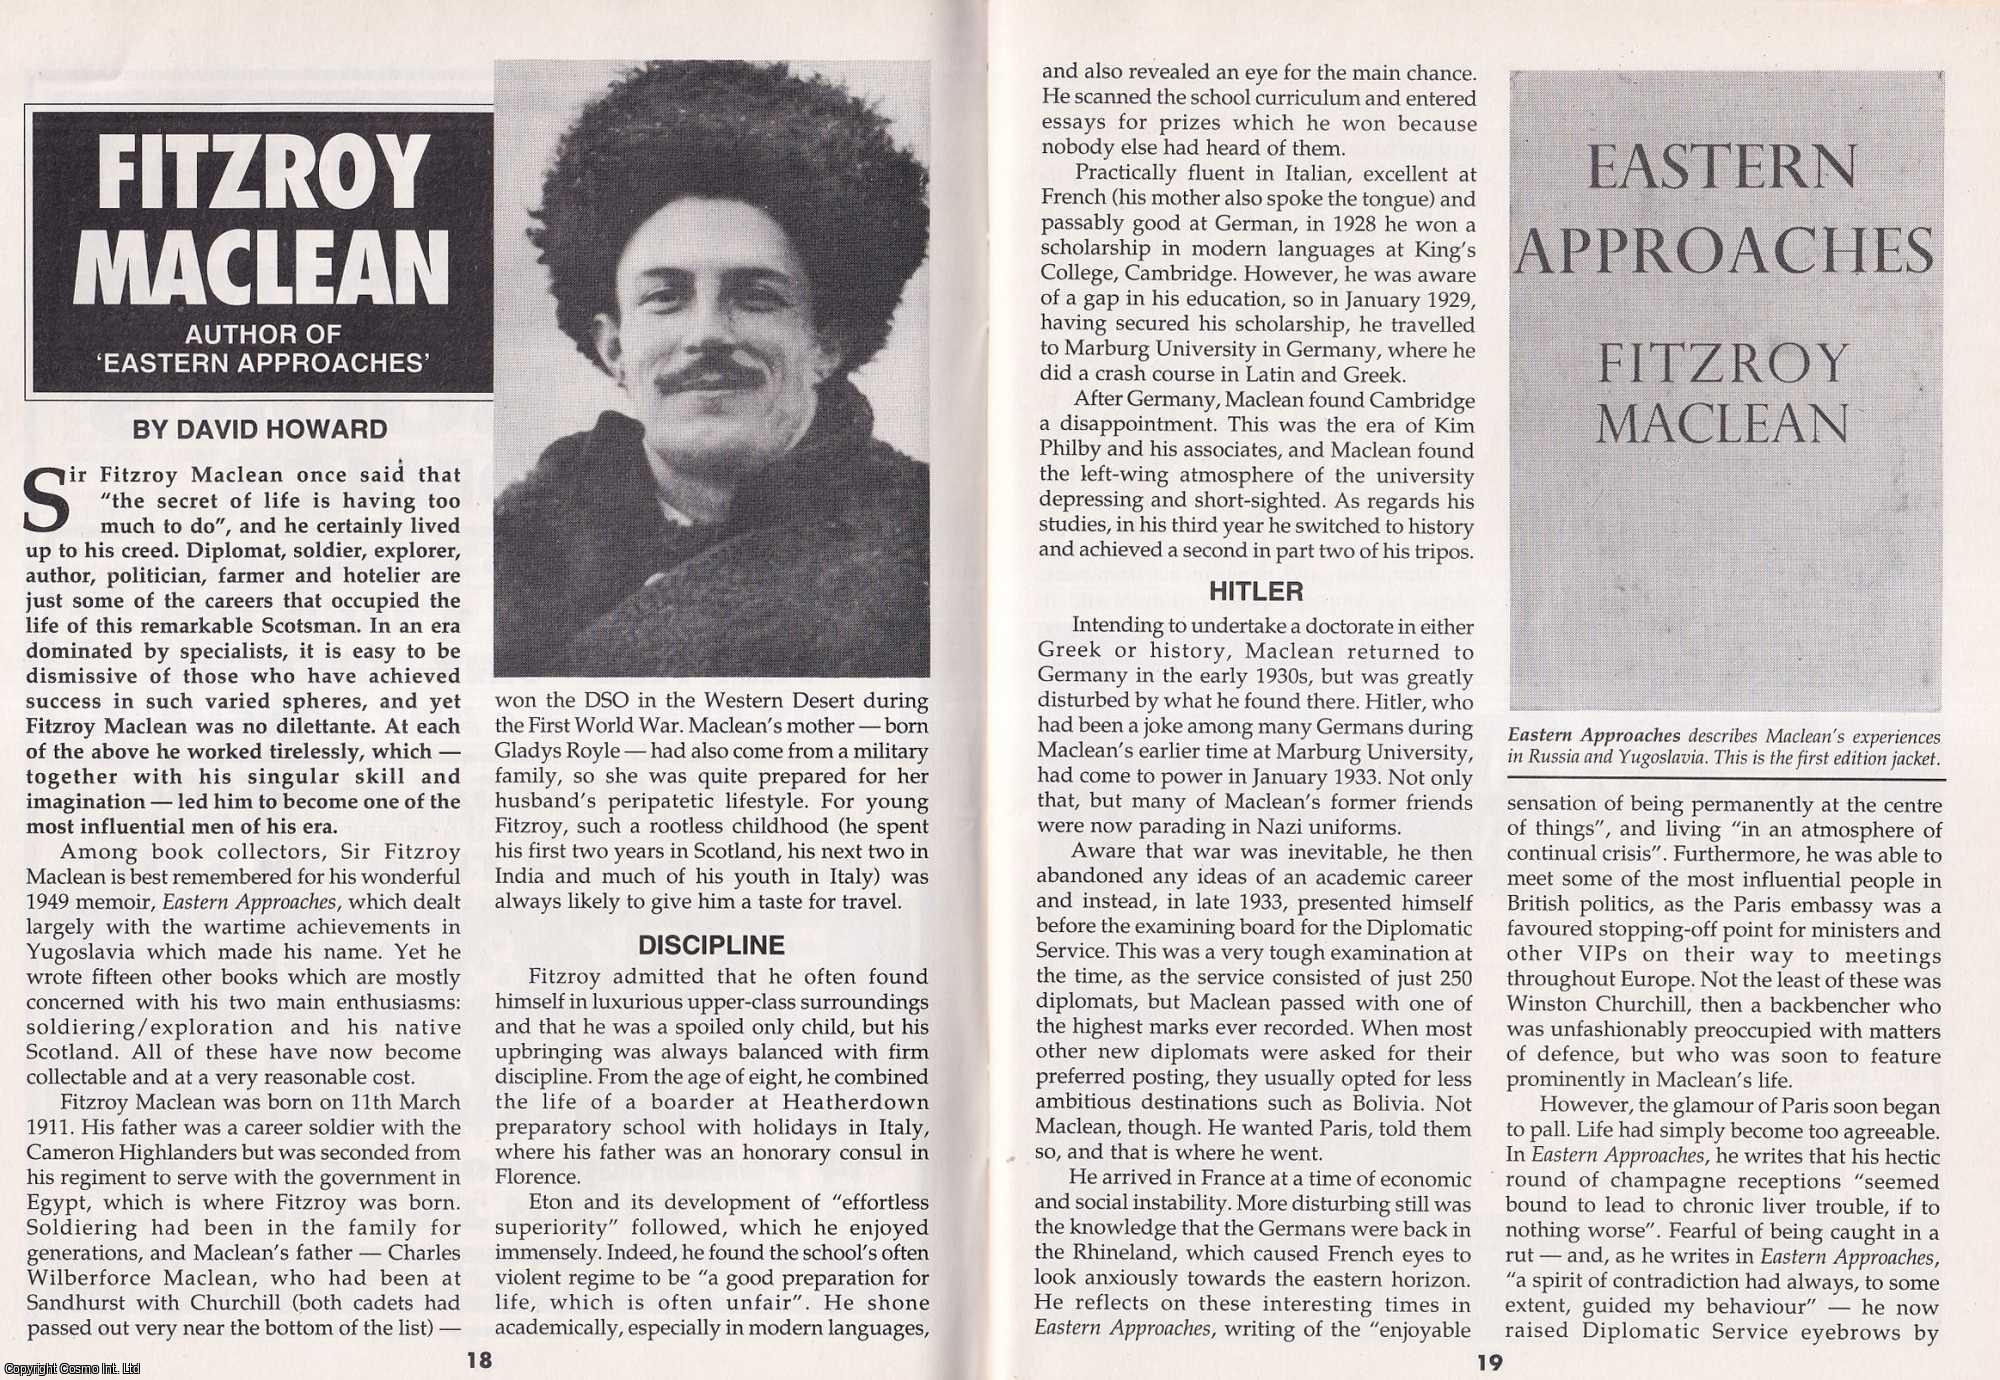 David Howard - Fitzroy Maclean. Author of Eastern Approaches. This is an original article separated from an issue of The Book & Magazine Collector publication, 2000.